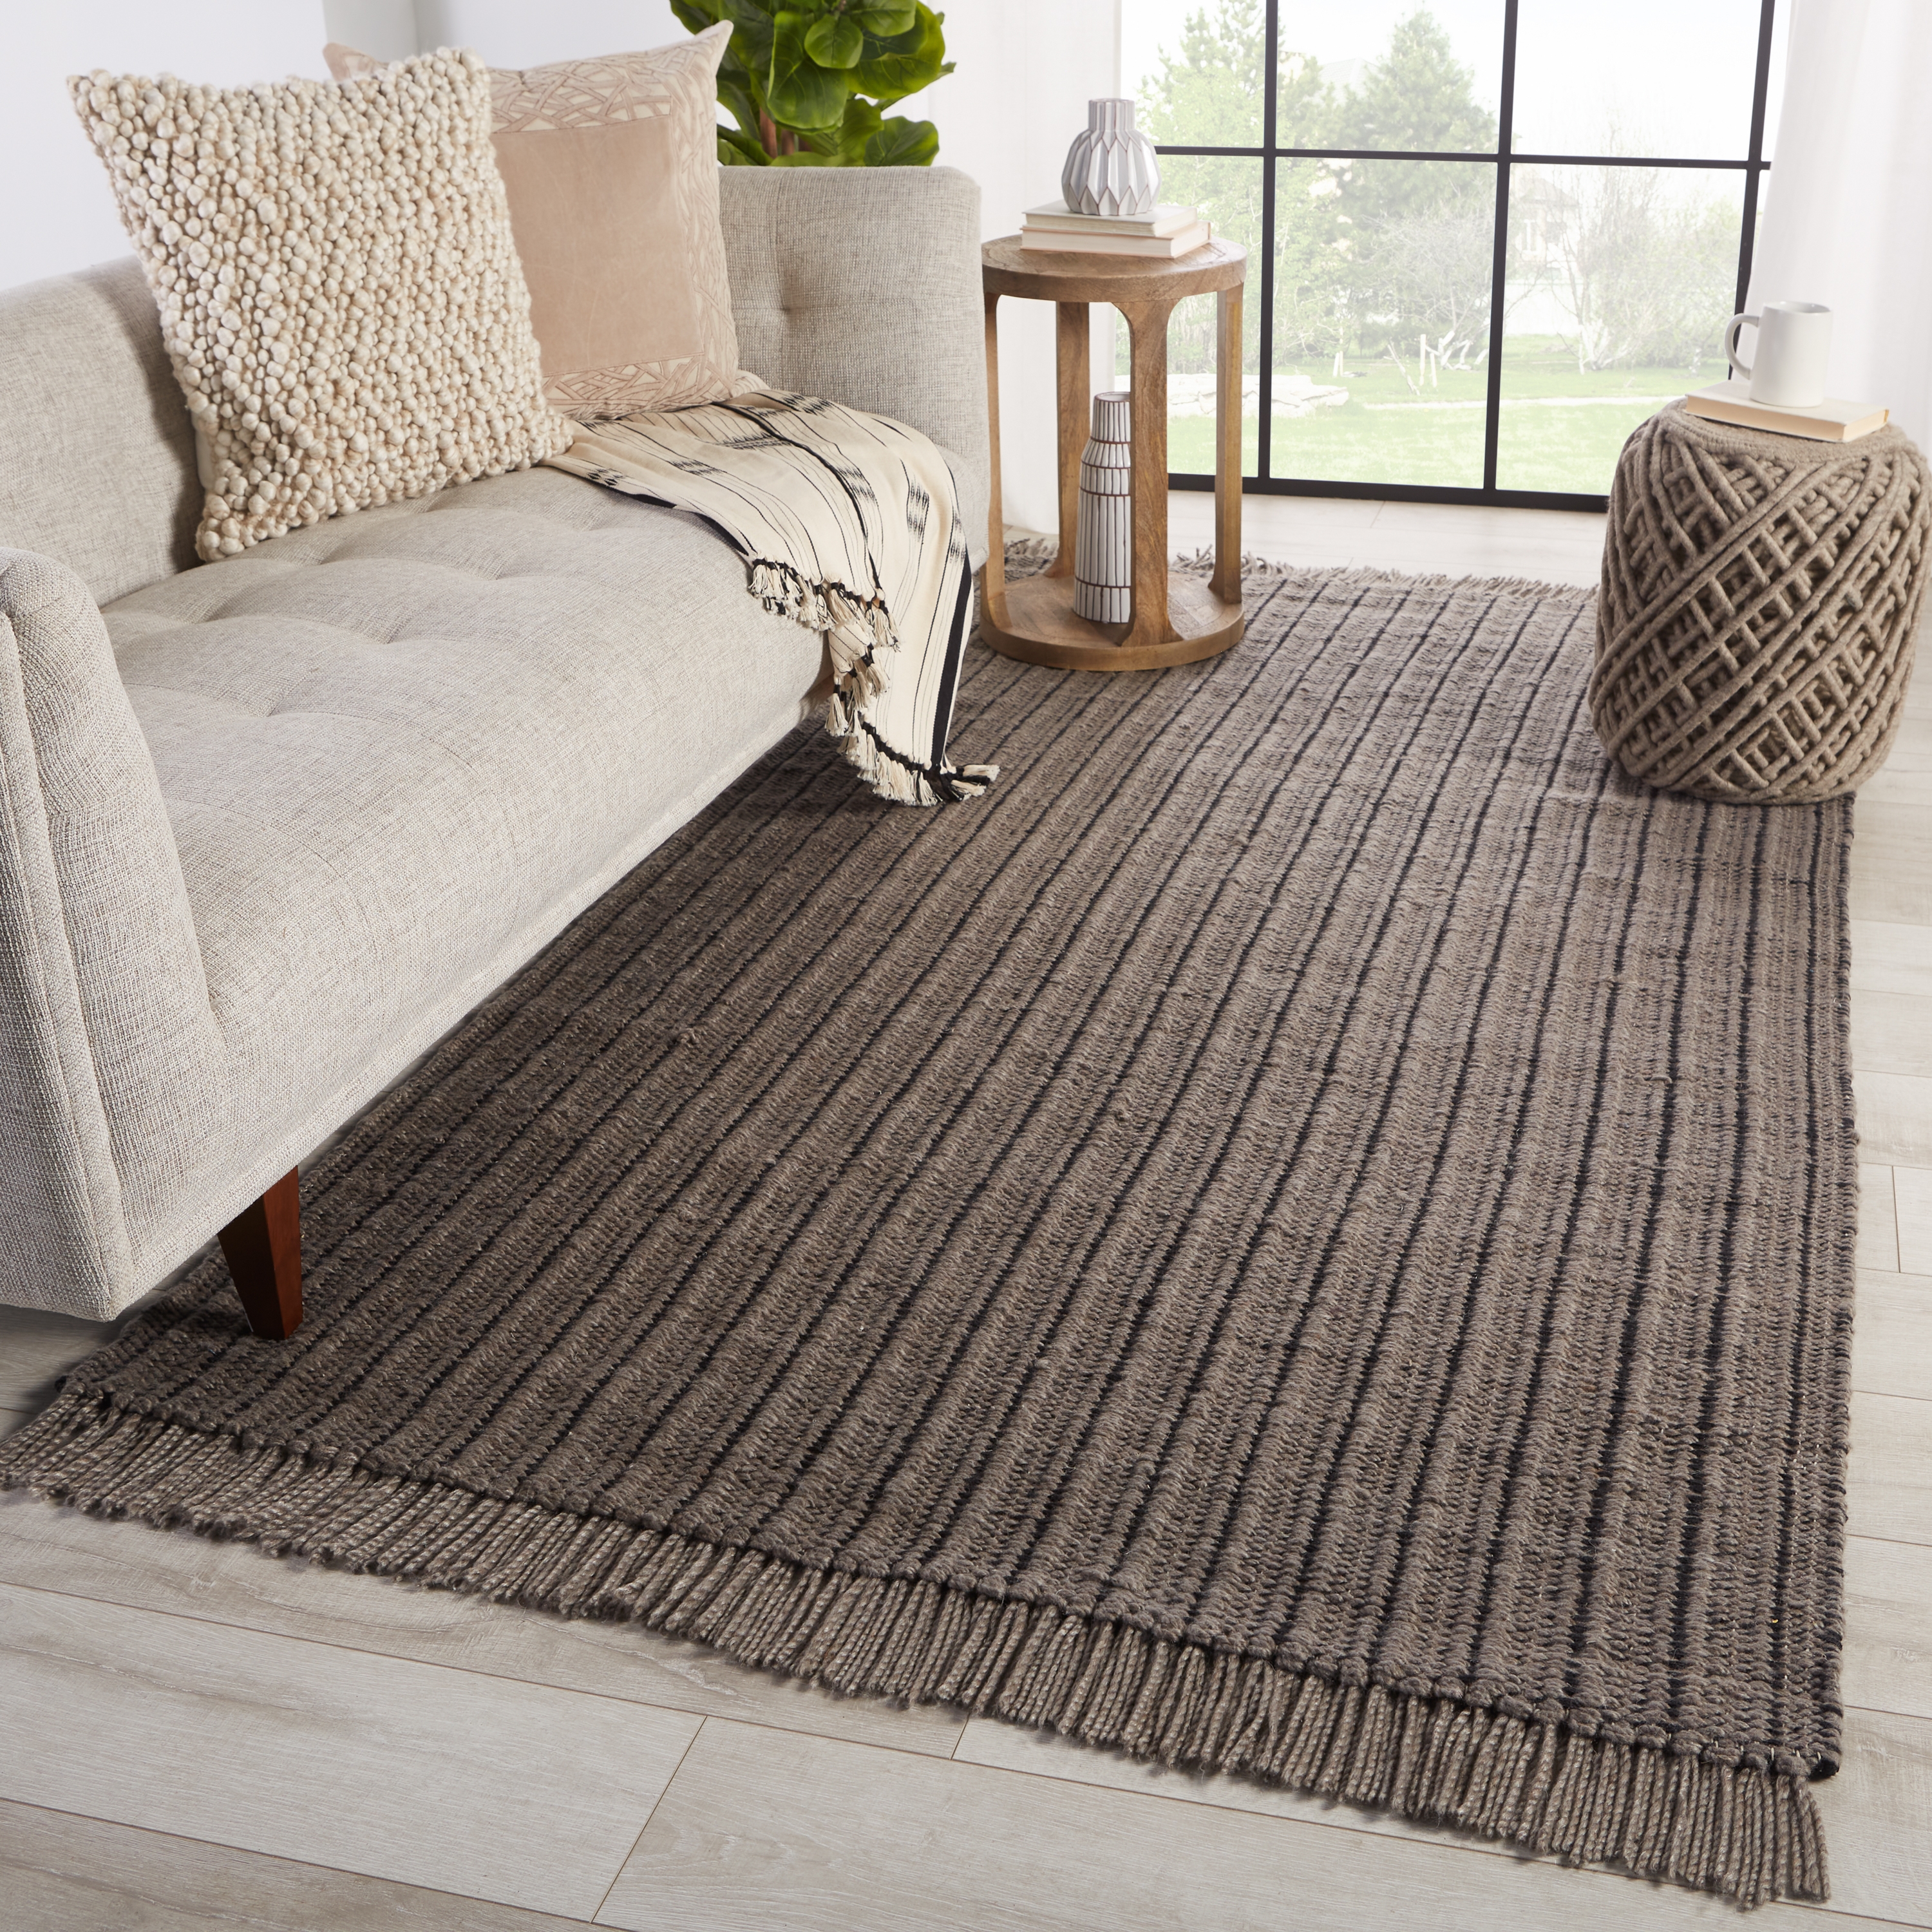 Poise Handwoven Solid Gray/ Black Area Rug (8'X10') - Image 4